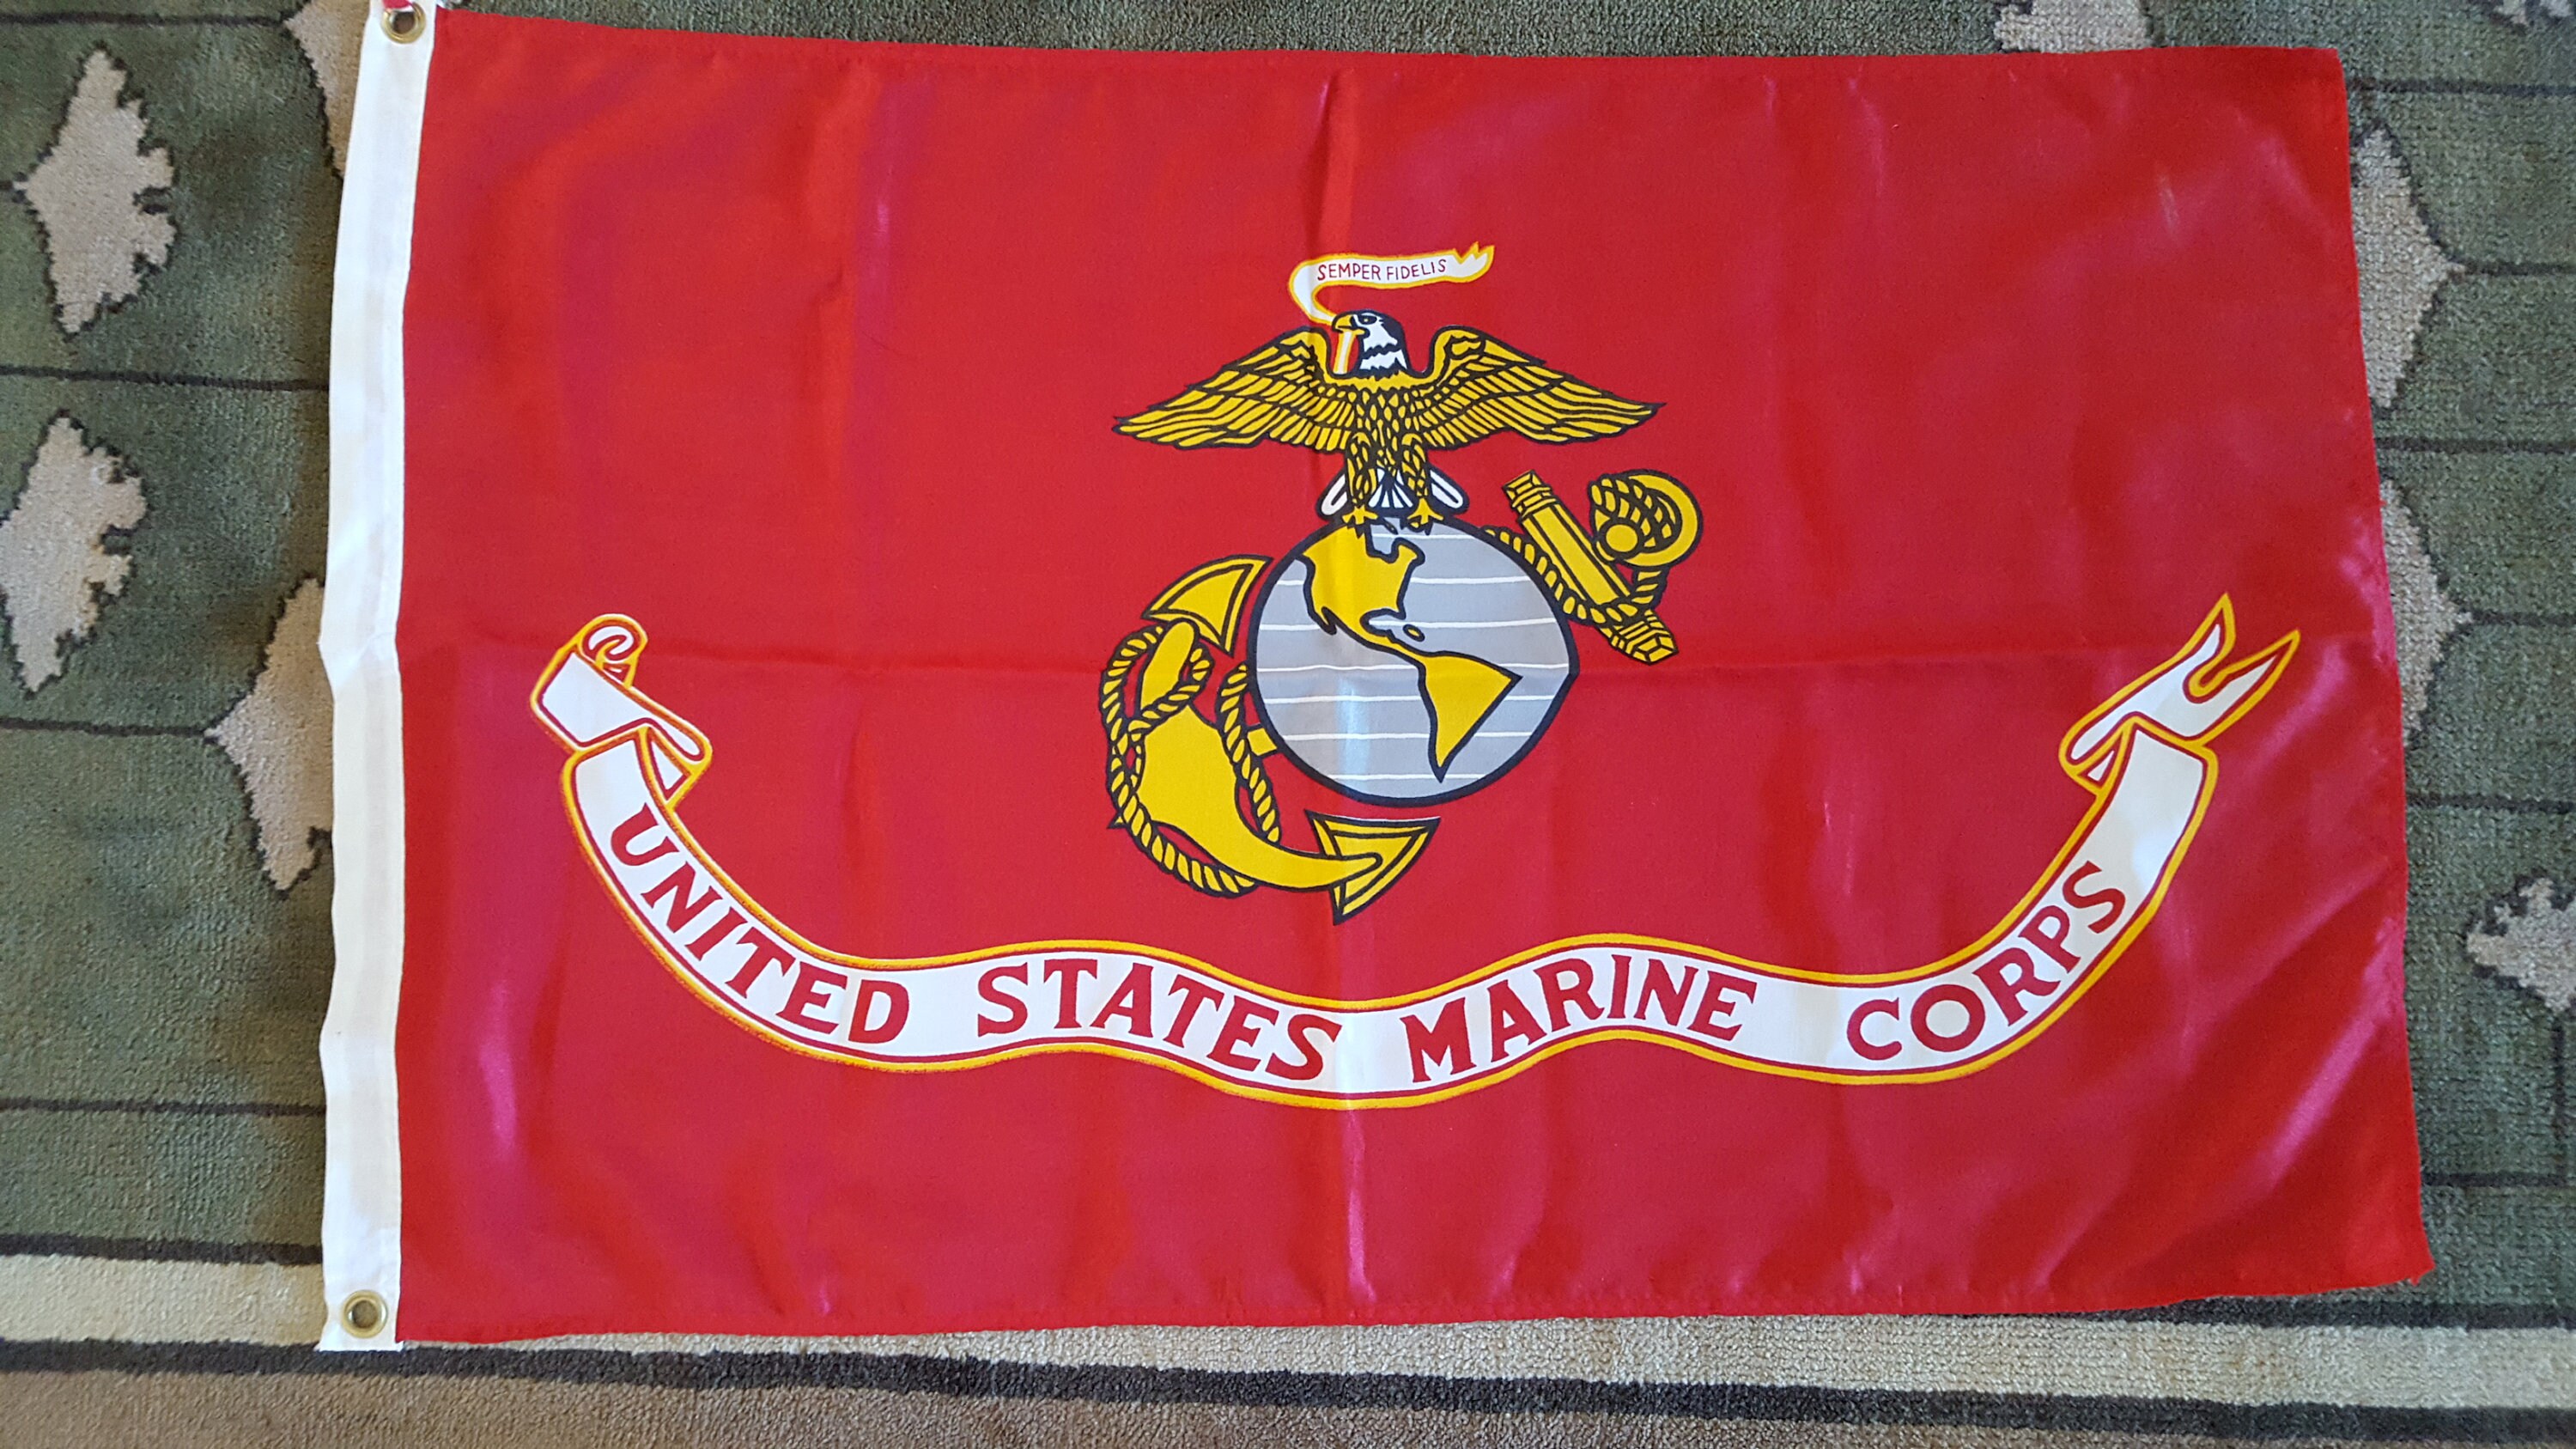 Vintage Nylon & Cotton Blend Possibly United States Marine Corps Flag, Brass Grommets Approximately 3'x2'